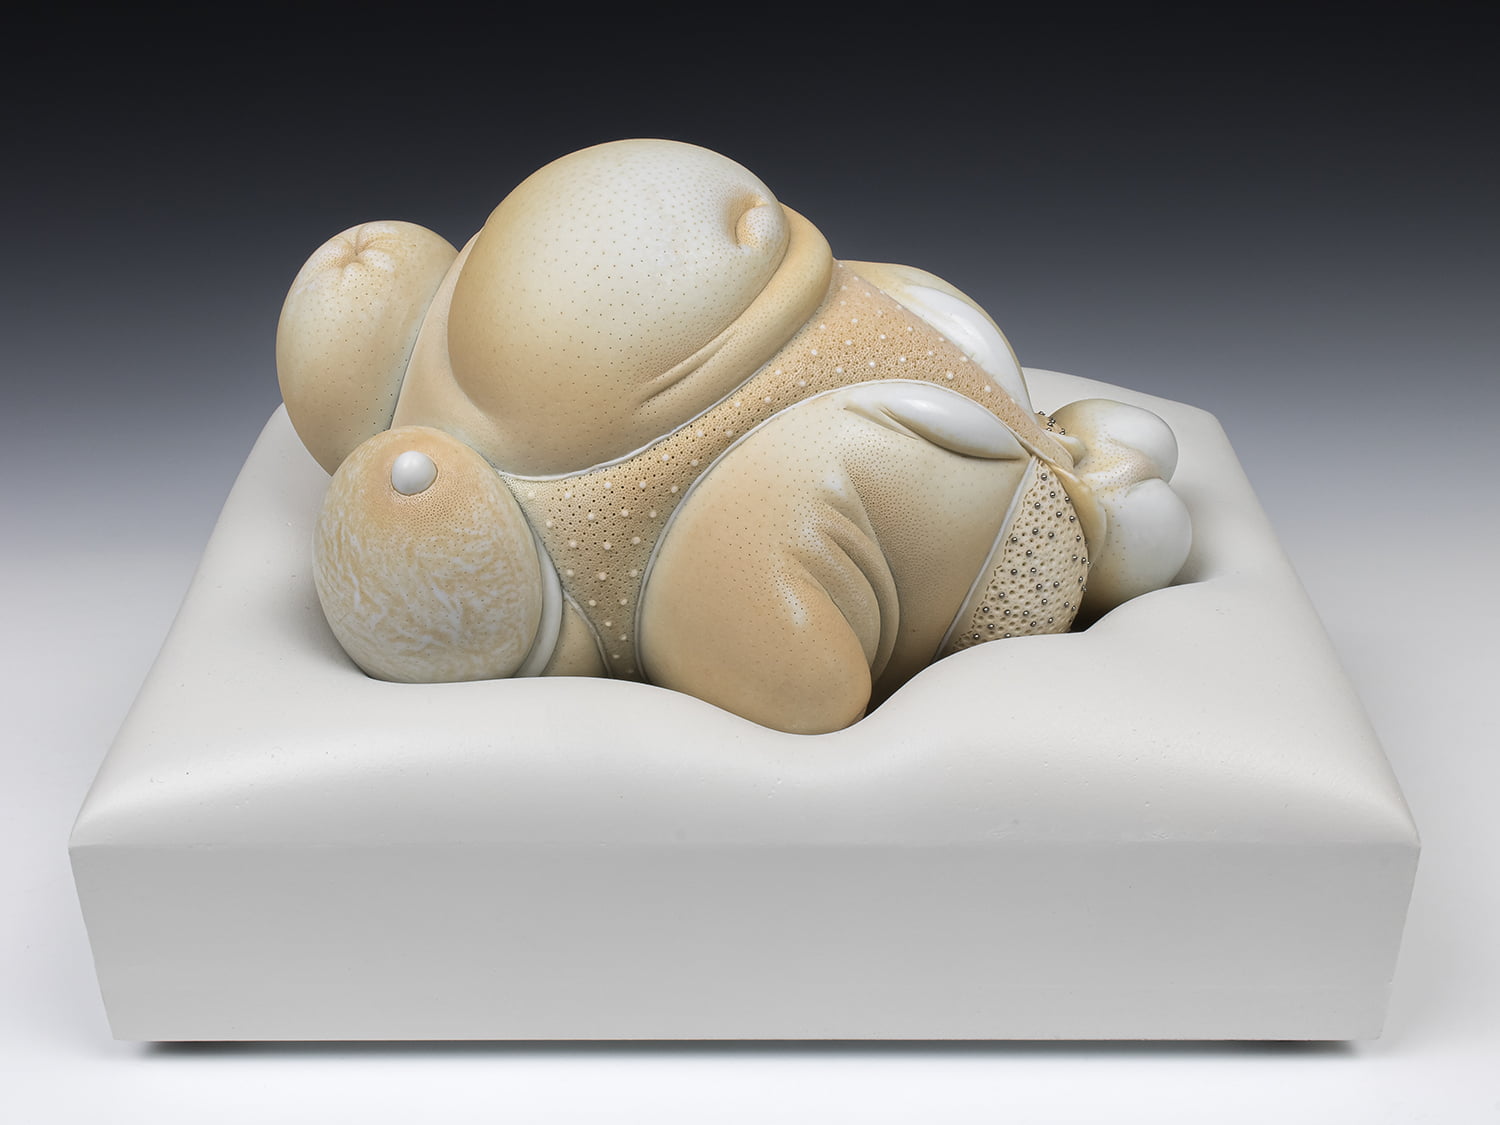 Jason Briggs "Misty" (full view). porcelain, hair, and mixed media sculpture ceramics.